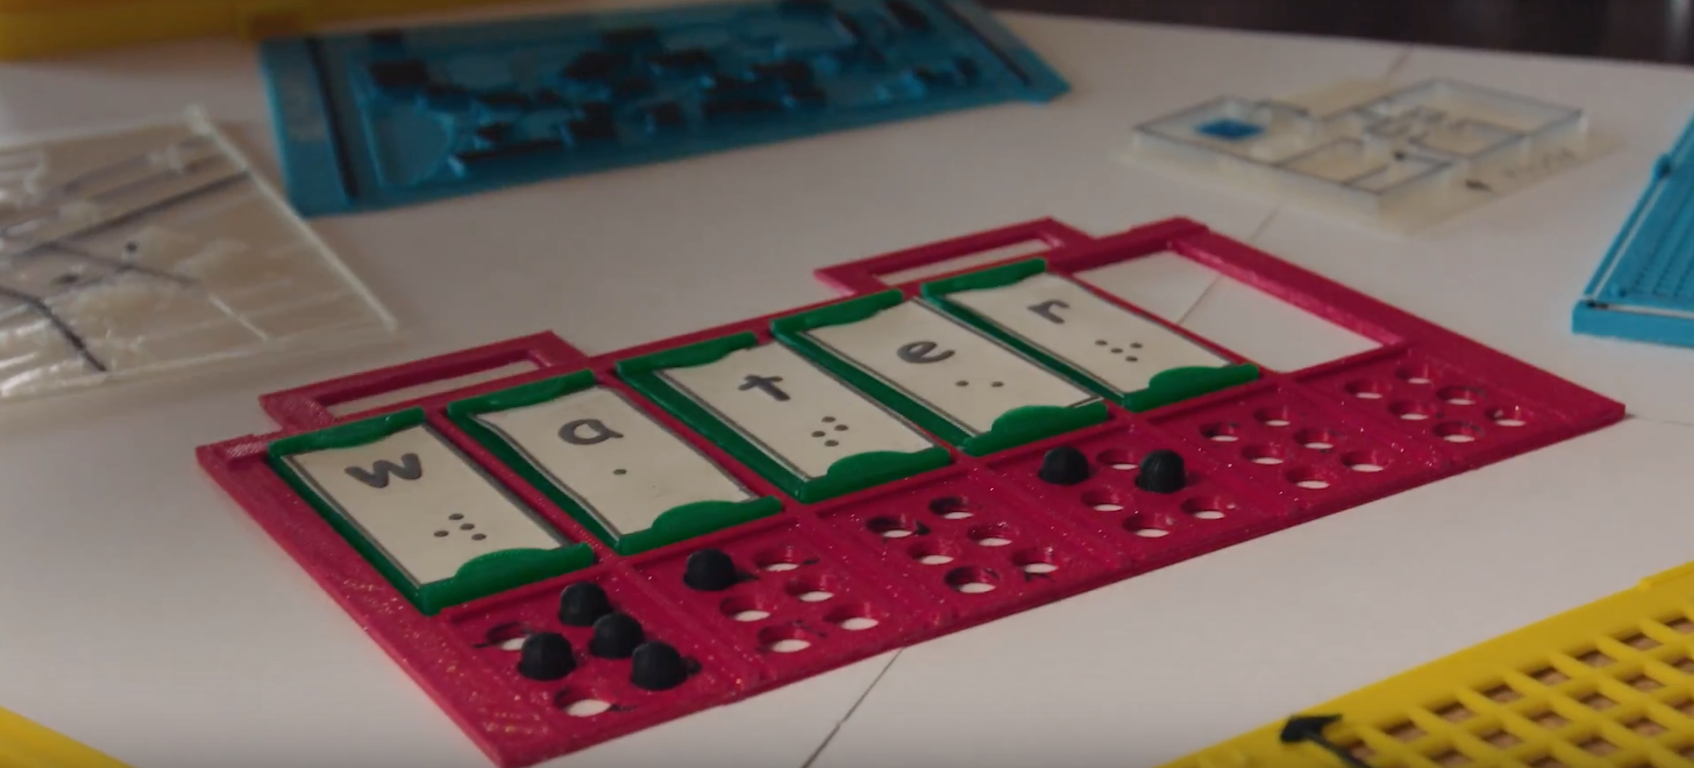 3D printed "water" in print and braille